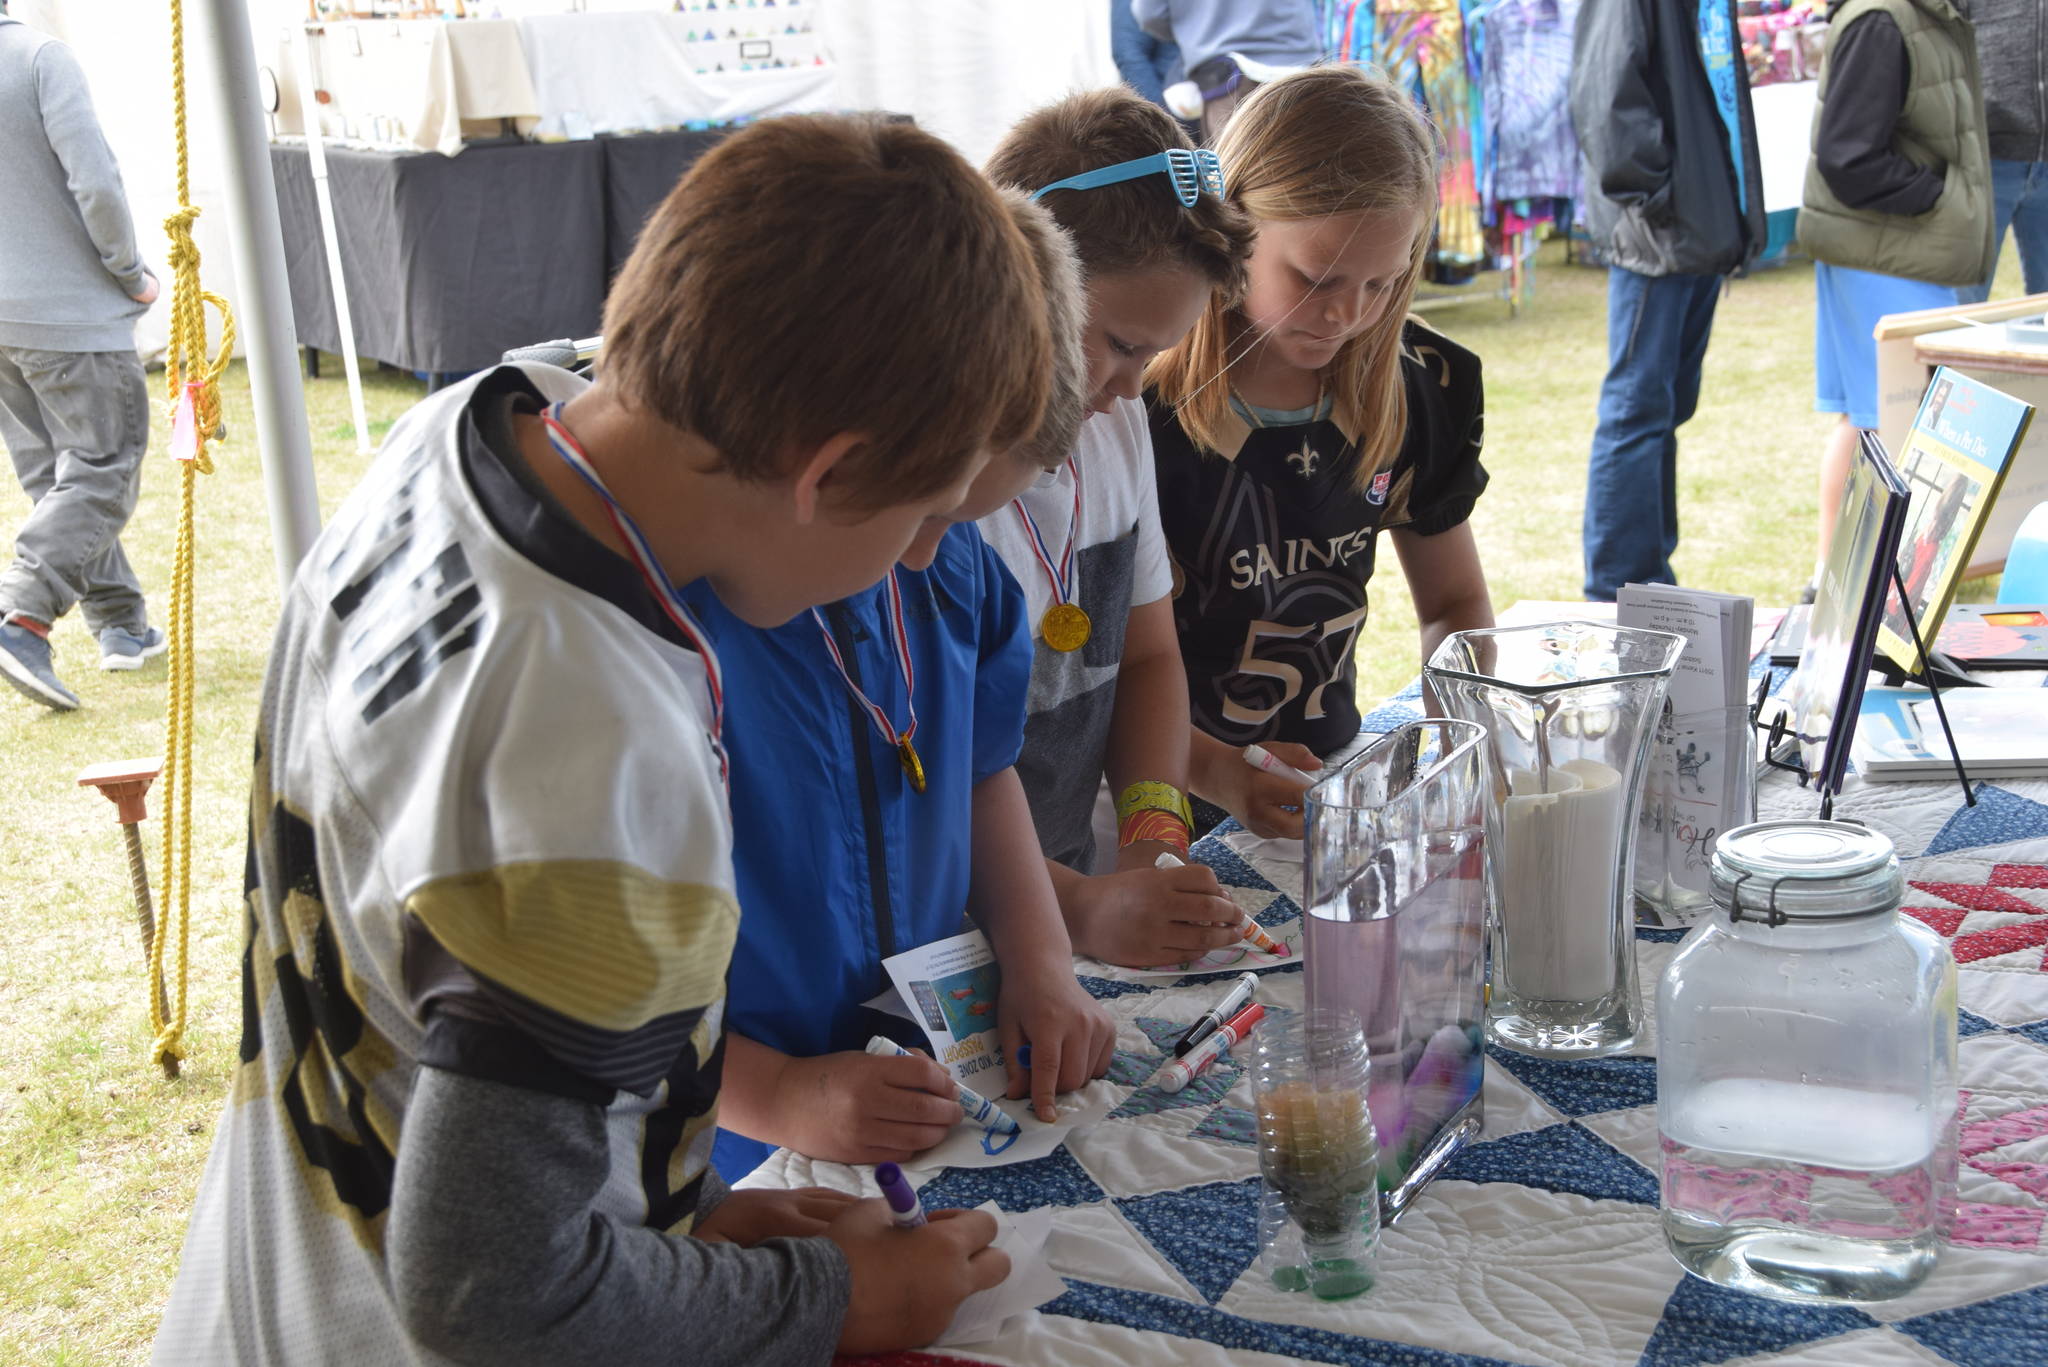 Kids color on sheets of rice paper that are then put into a container of water to show how pollutants get into rivers and other water sources during the Kenai River Festival at Soldotna Creek Park in Soldotna, Alaska on June 8, 2019. (Photo by Brian Mazurek/Peninsula Clarion)